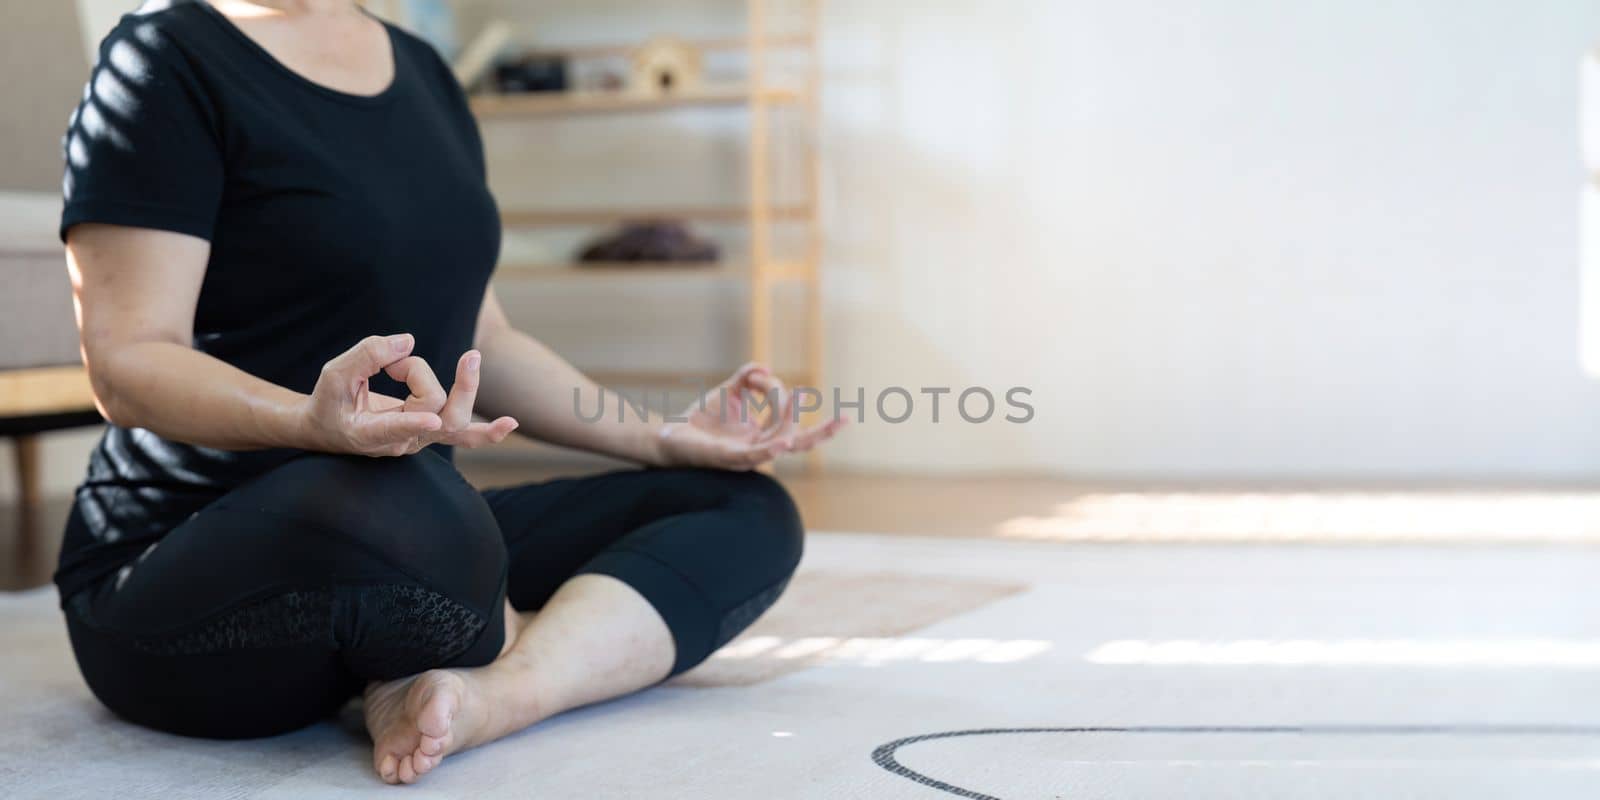 Healthy and elderly woman in workout clothes practicing yoga in her living room by nateemee